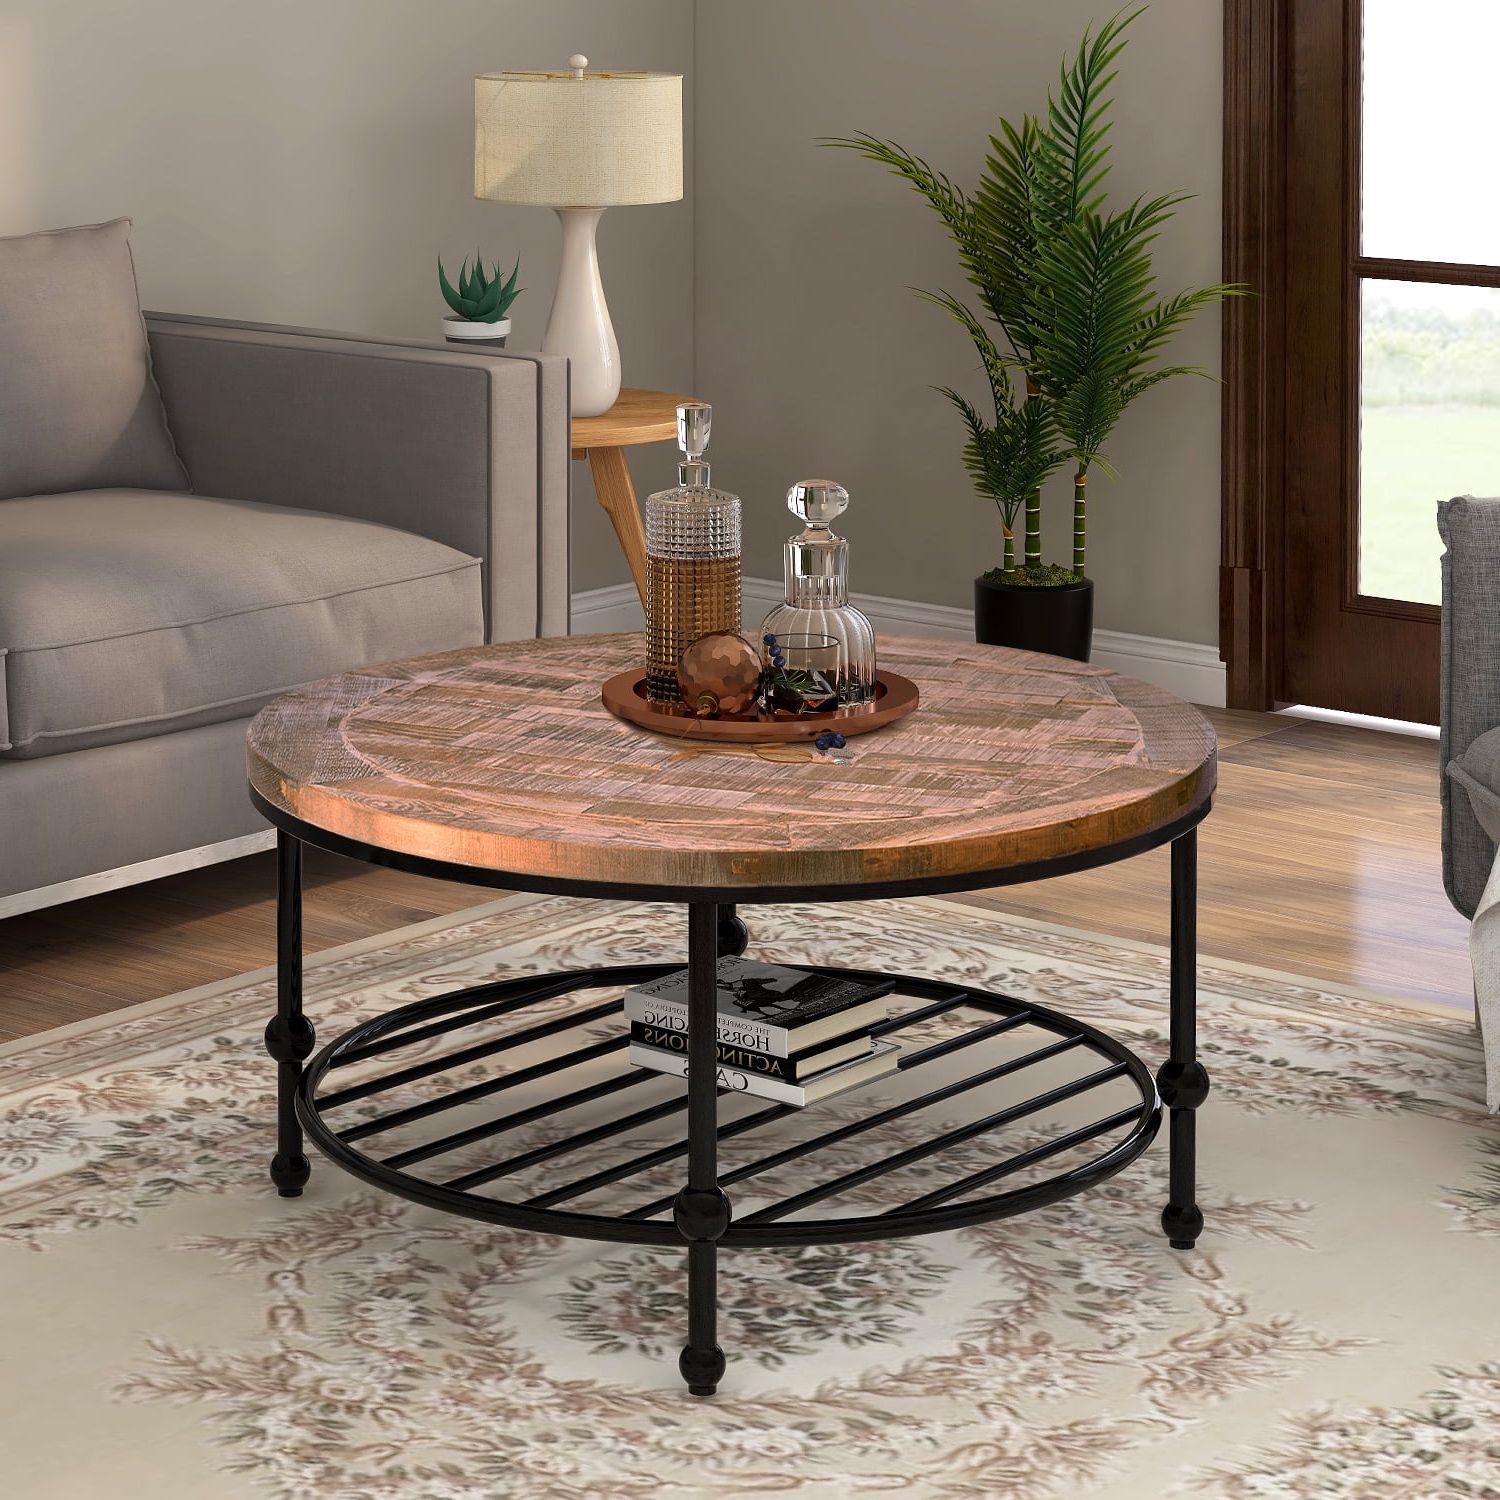 Favorite Rustic Natural Round Coffee Table With Storage Shelf For Living Room Within Coffee Tables With Open Storage Shelves (View 10 of 15)